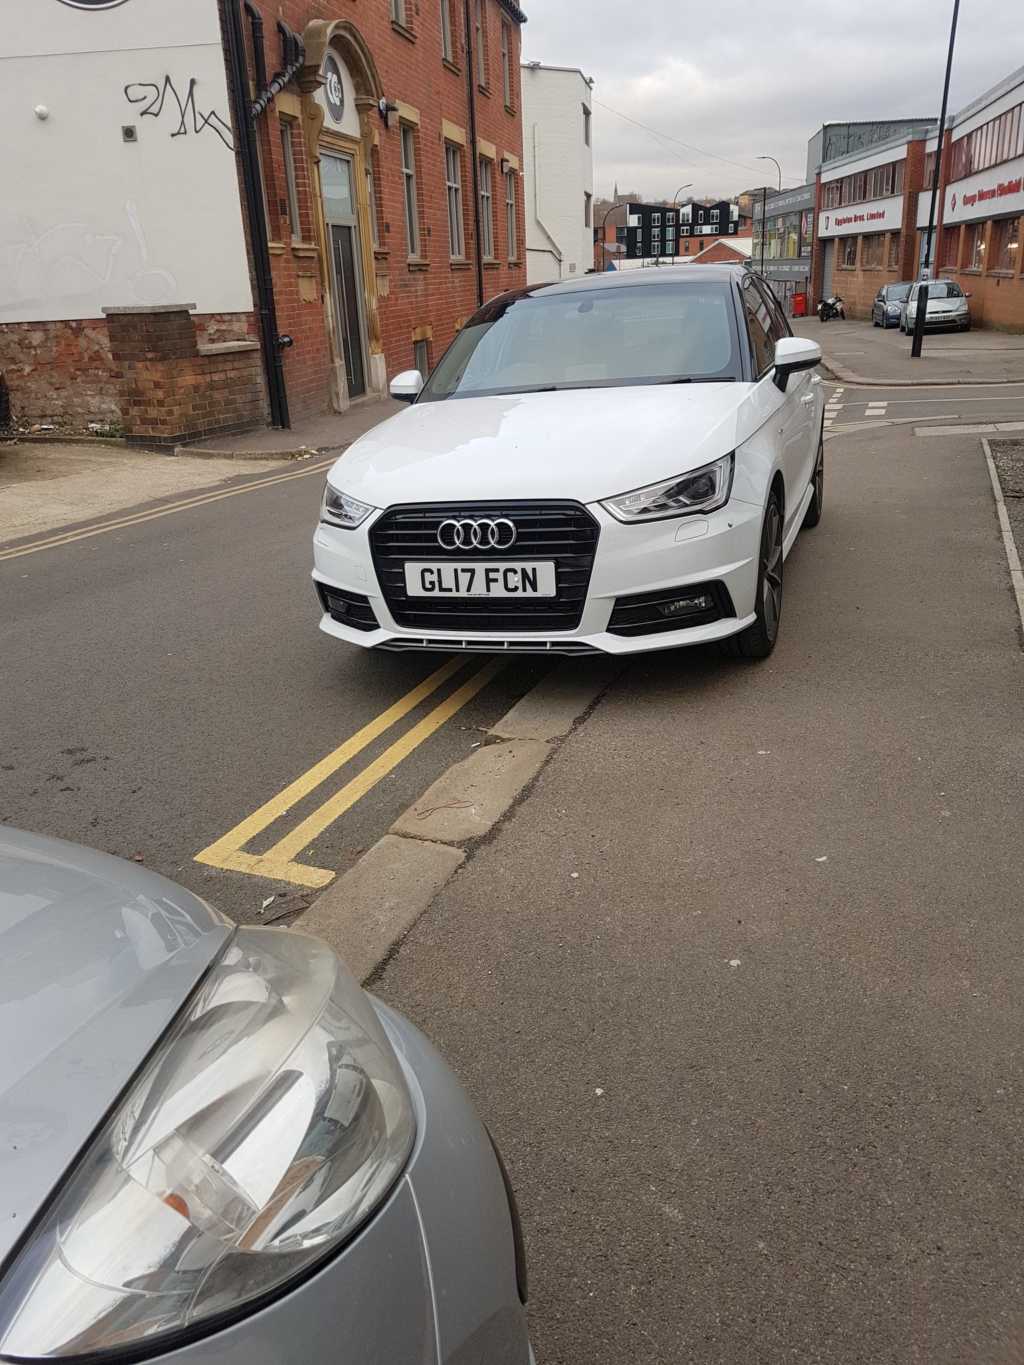 GL17 FCN displaying Inconsiderate Parking